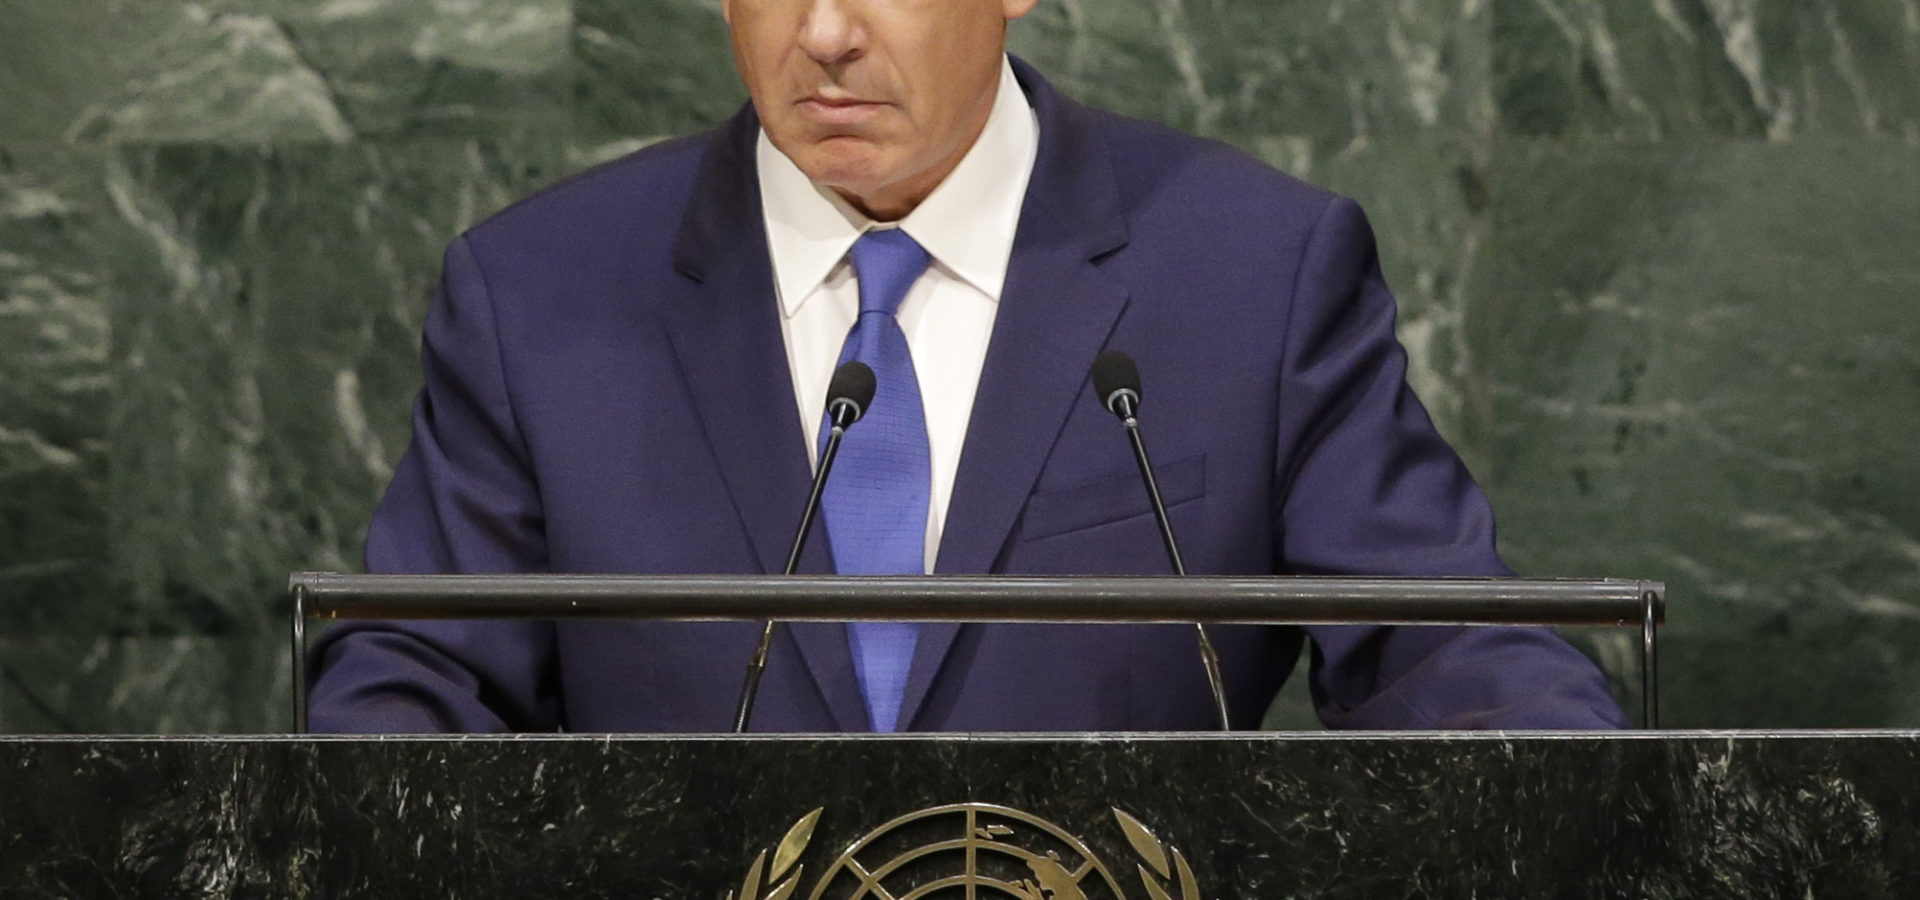 Israel's Prime Minister Benjamin Netanyahu pauses during his speech to stare at the audience during the 70th session of the United Nations General Assembly at U.N. headquarters, Thursday, Oct. 1, 2015. (AP Photo/Seth Wenig)